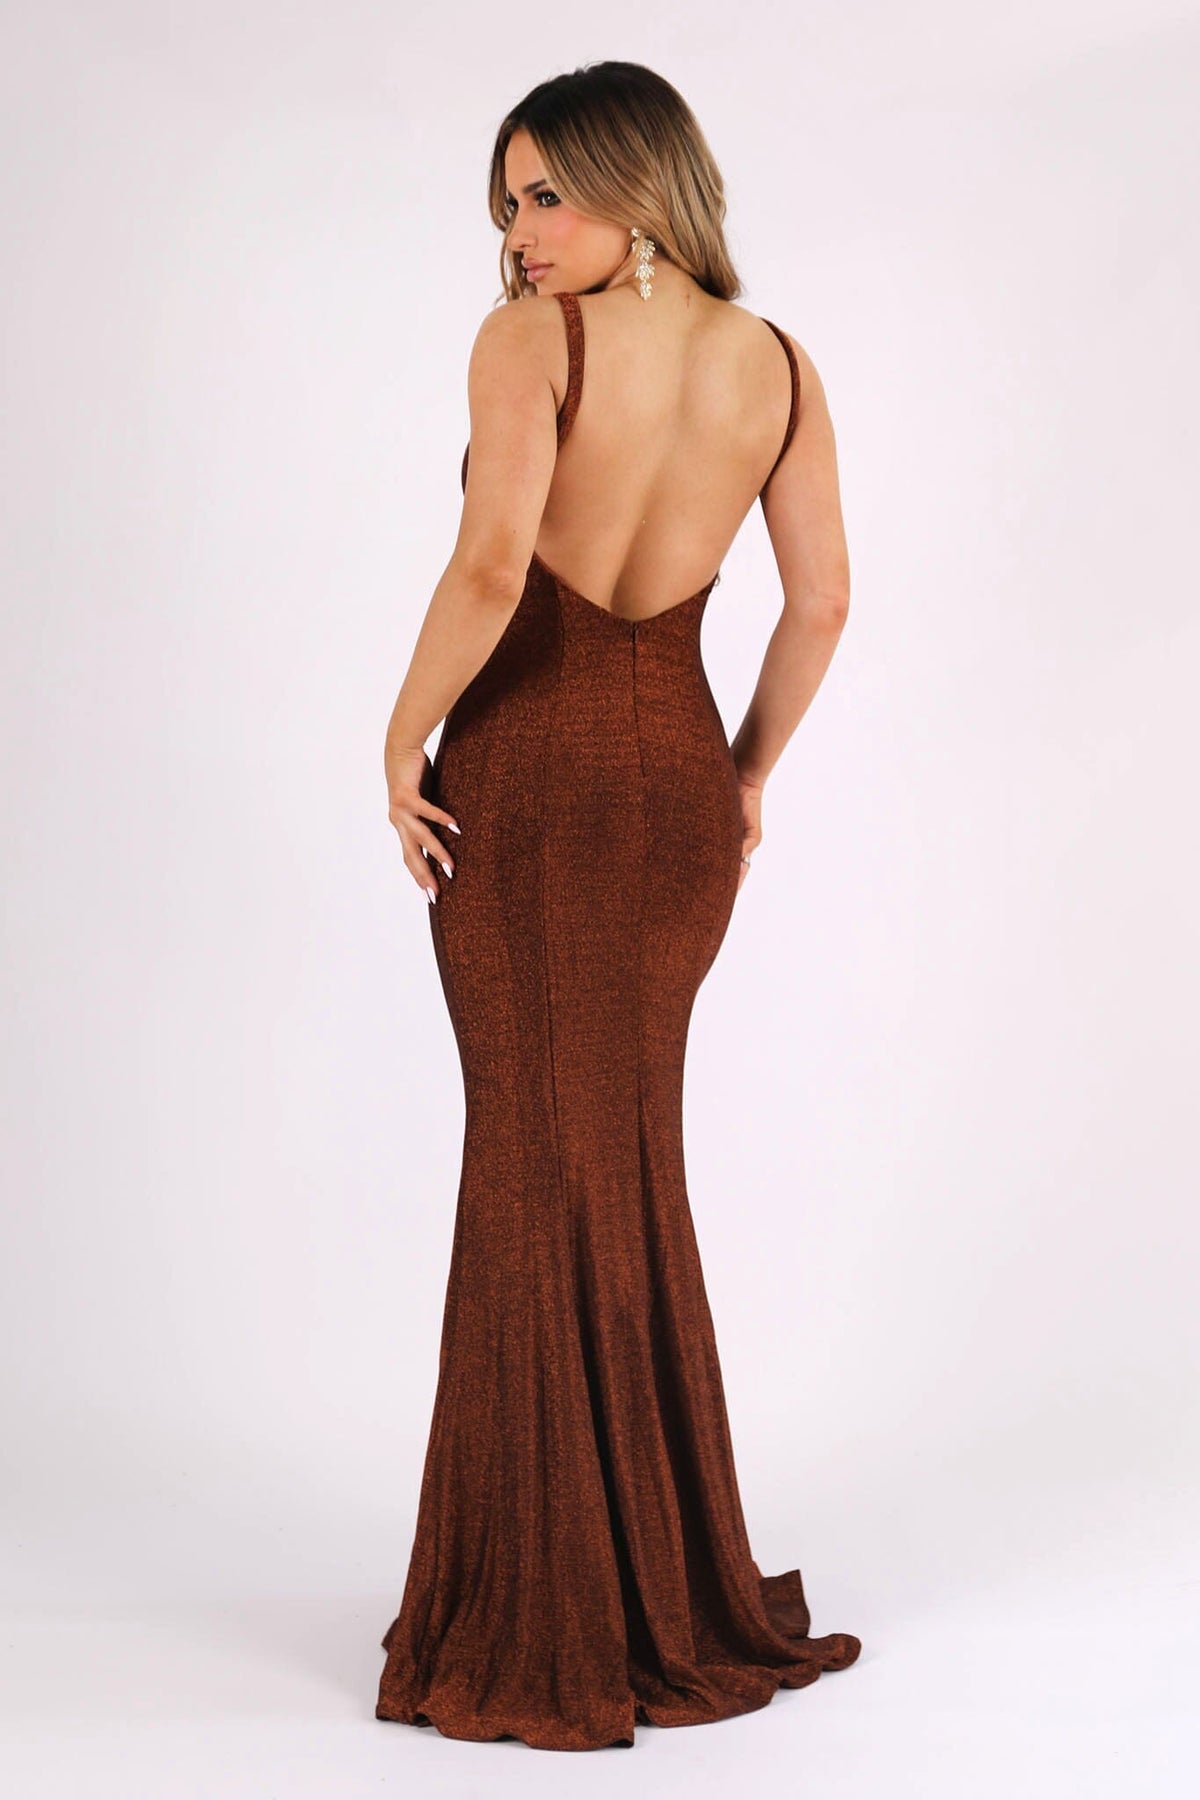 Backless Design of Shimmer Rust Brown Coloured Fitted Evening Gown with V Neckline